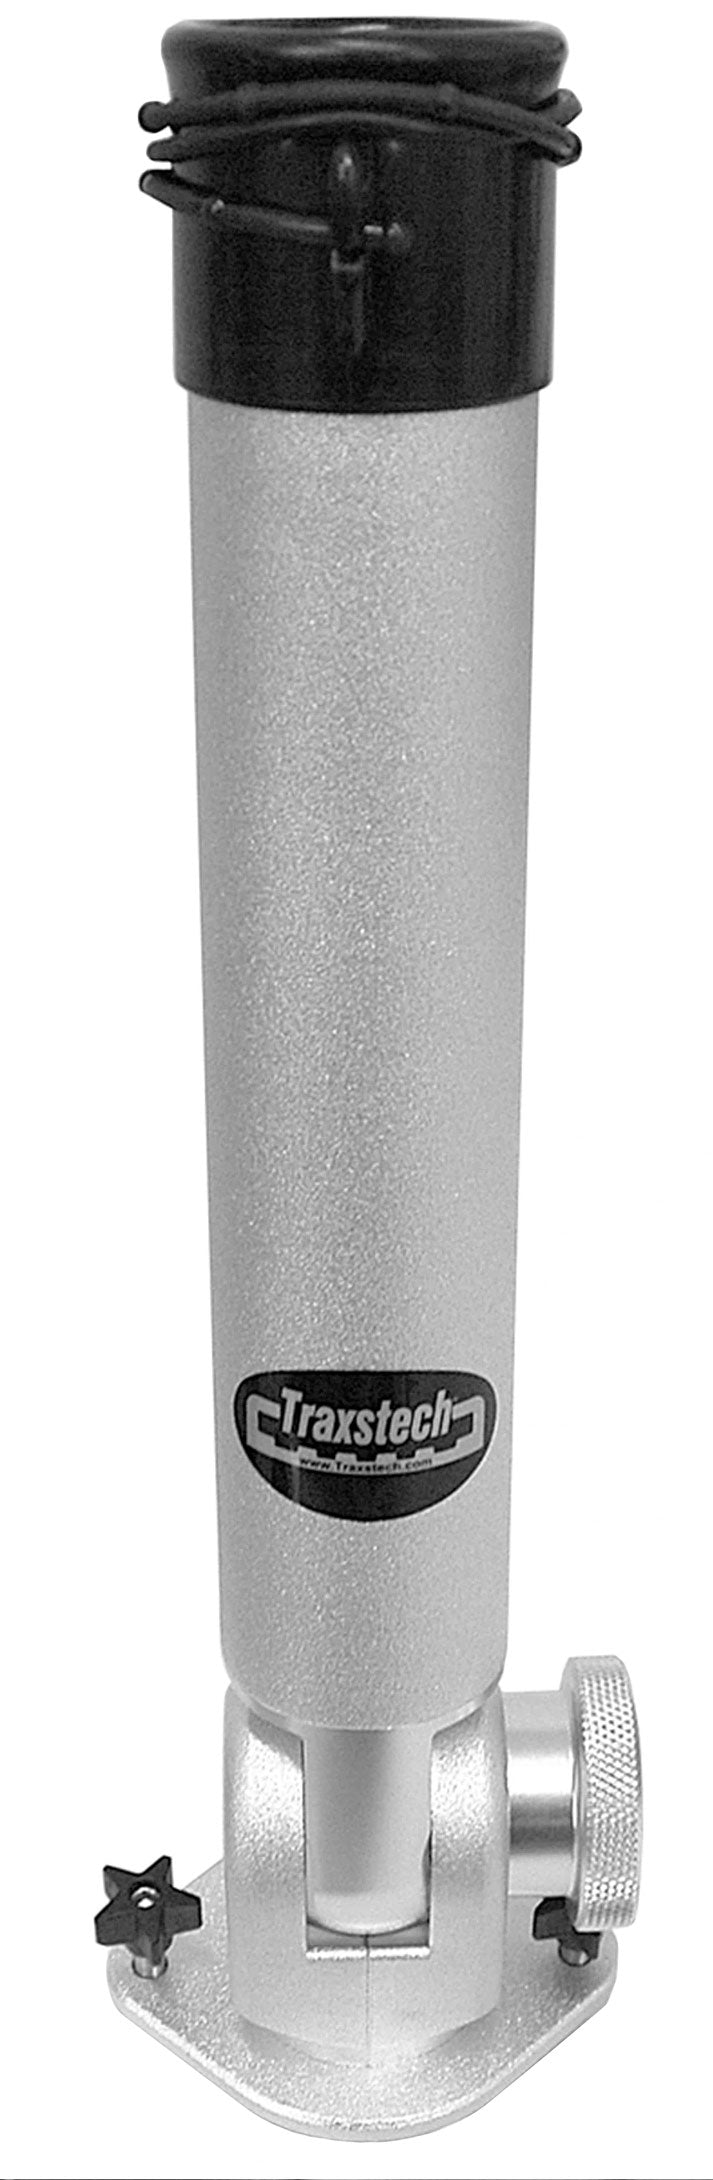 Traxstech GT-100 17 Ratcheting Rod Holder with Oval Base